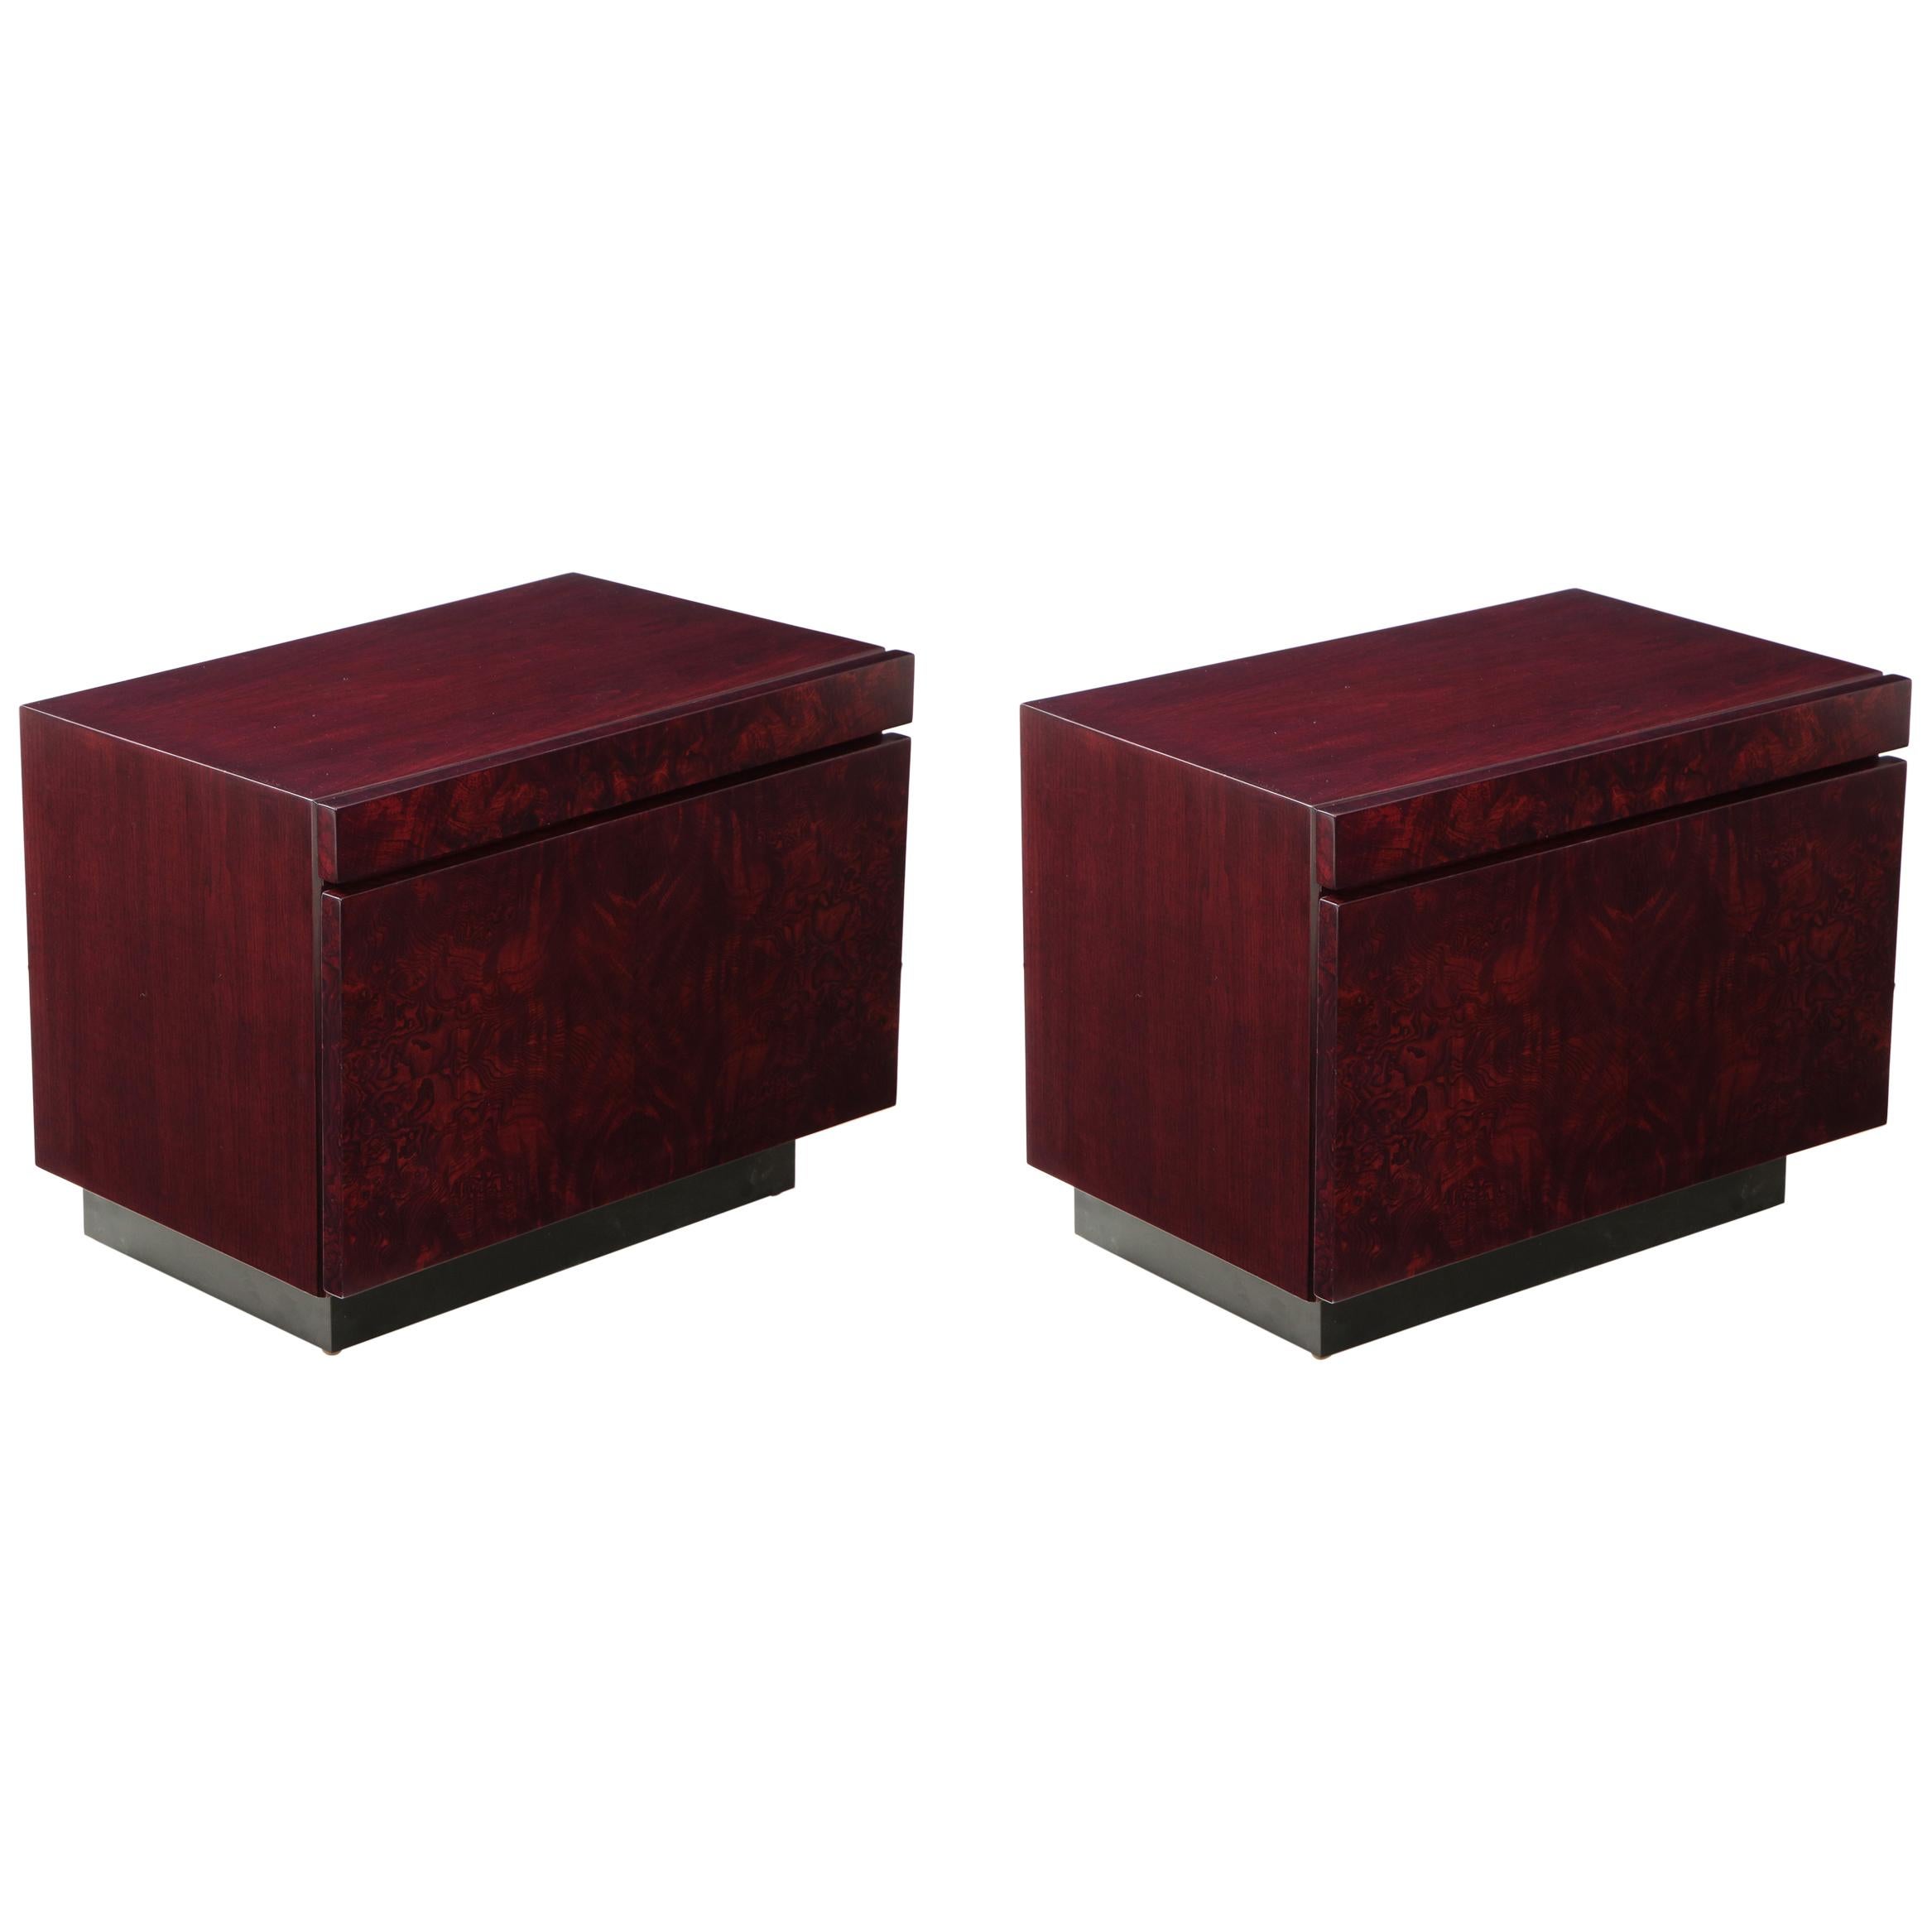 Pair of mint restored burl nightstands featuring a custom color red wine stain. Each featuring an ample sized bottom drawer and a laminate lined pullout / pull-out drinks tray all sitting on a matte black lacquer base. Roland Carter for Lane.